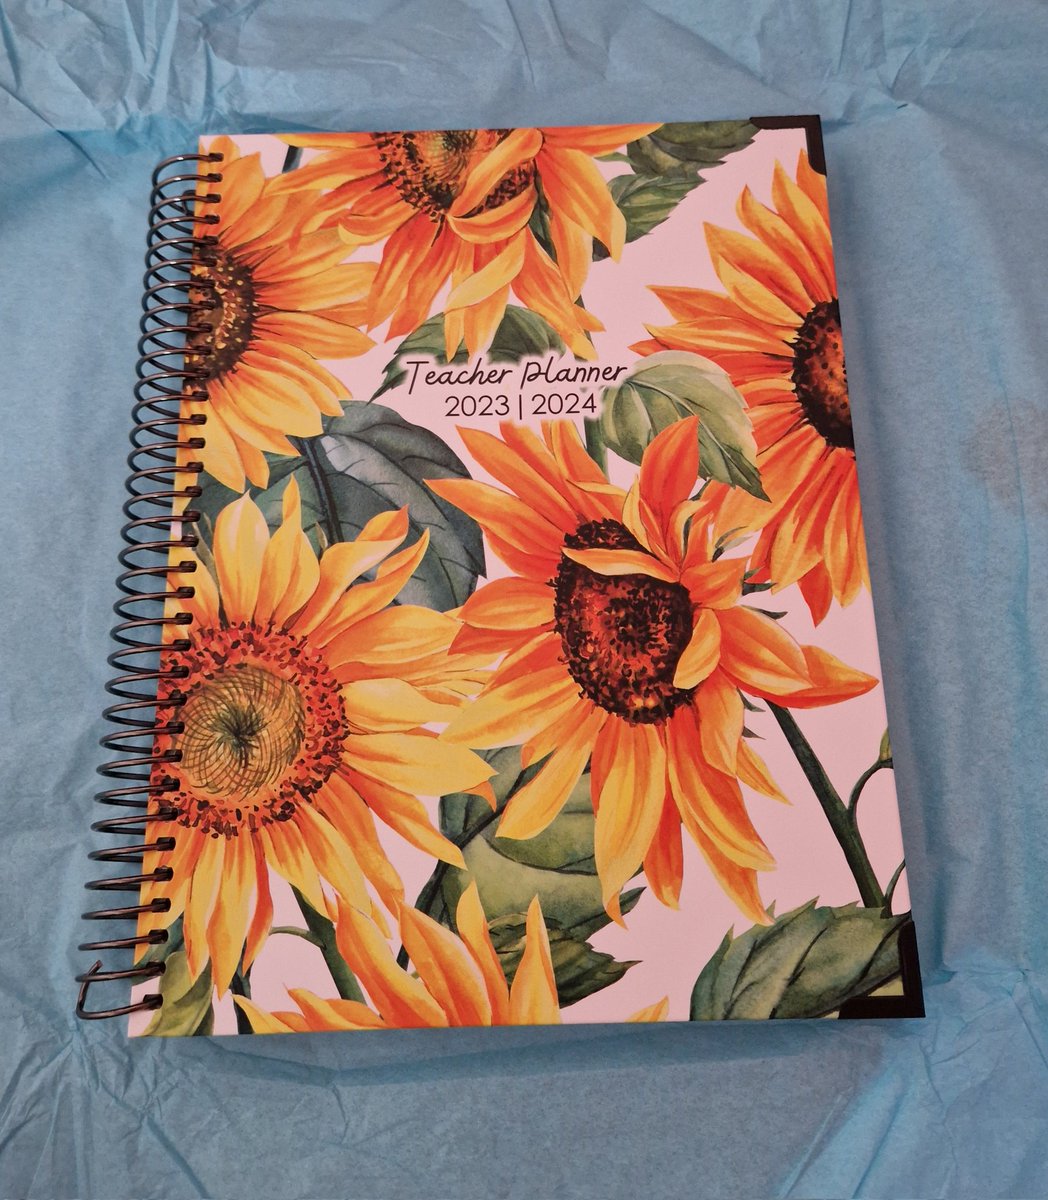 Here's my beautiful @TPositiveTC planner for this year! A bit late to the party this year but can't wait to get my washi tape out & get started! 🌻🌻🌻 #teacherplanner #positivity